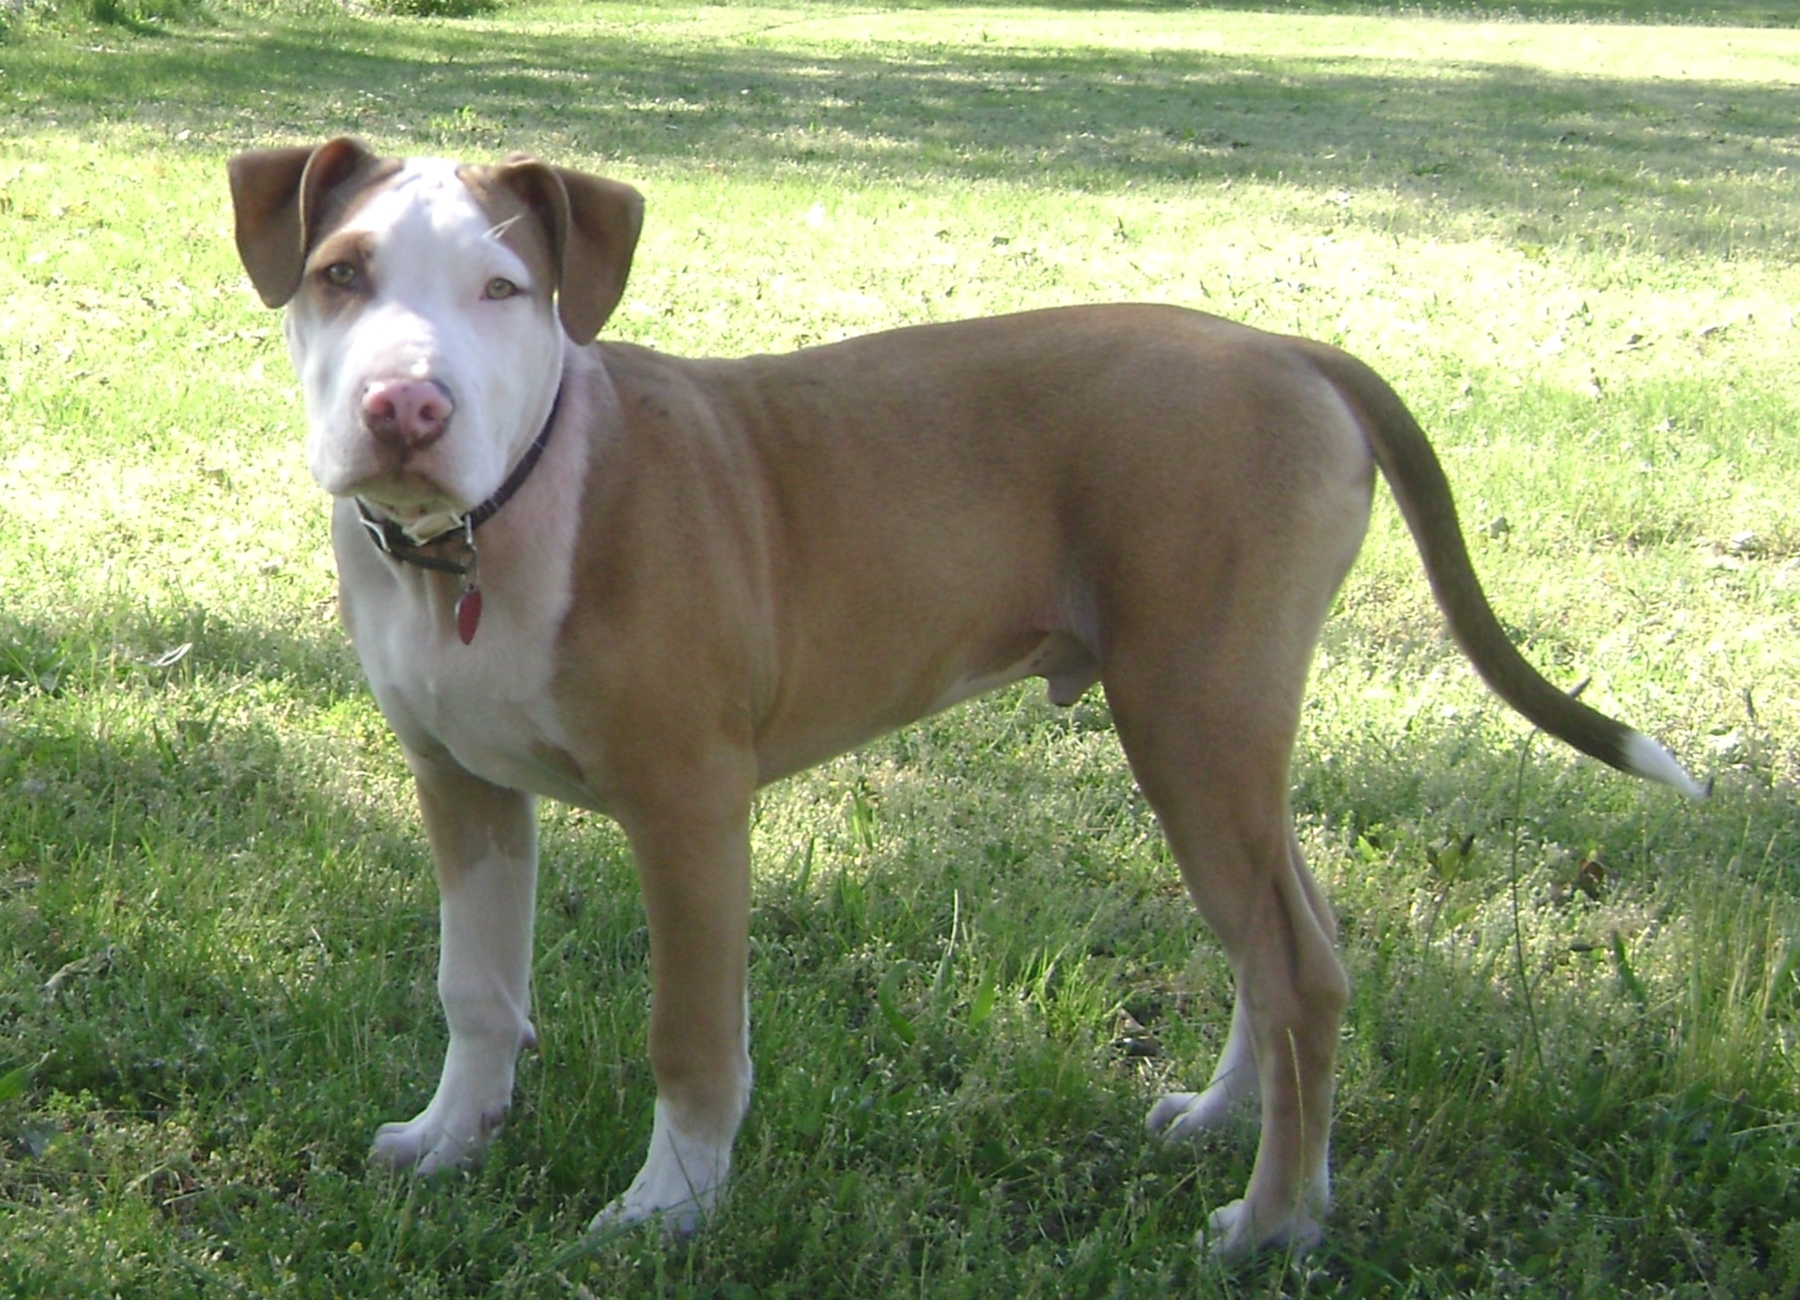 do pit bulls have long tails